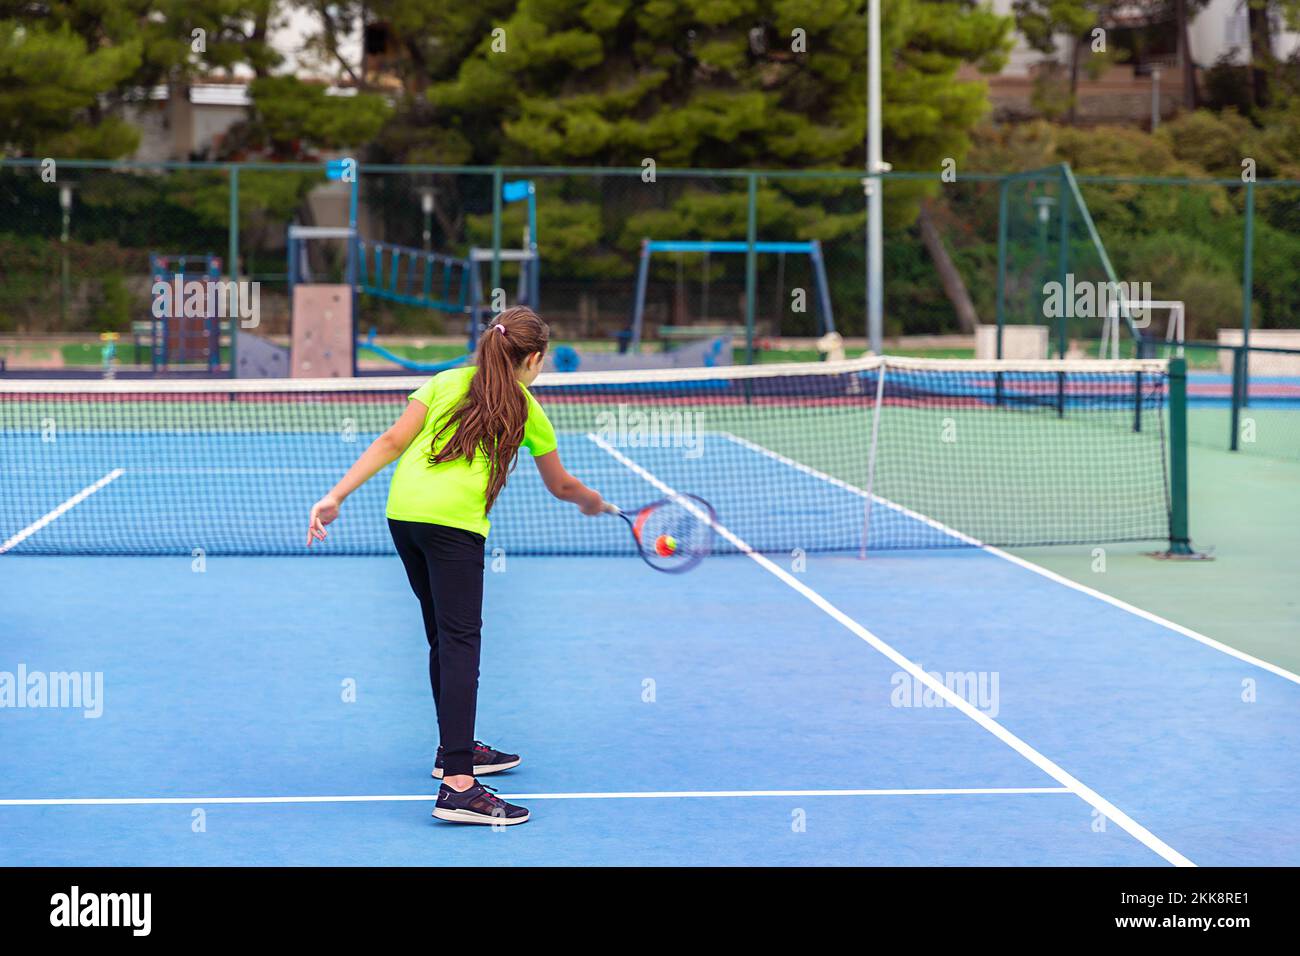 Young girl playing tennis. Serving the ball on tennis court. Stock Photo